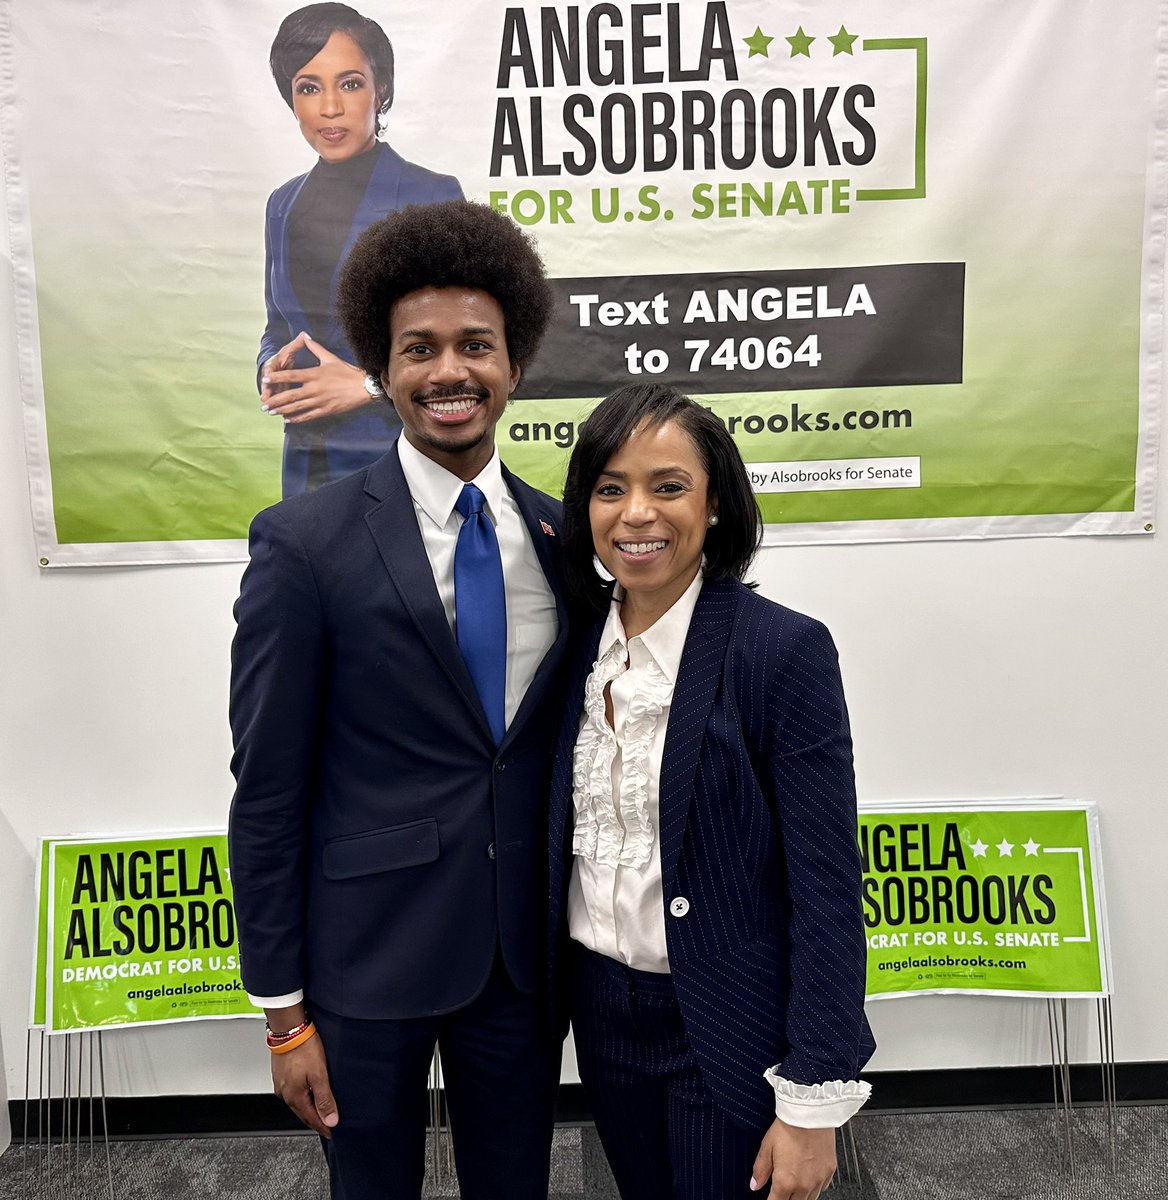 Had an extraordinary time in Baltimore meeting with @AngelaAlsobrook who will be the best next United States Senator from here. She listens to the voices of the future & has a public-servant’s heart and mind. She is who MD & the US needs. A TRUE Democrat & fighter for our future!